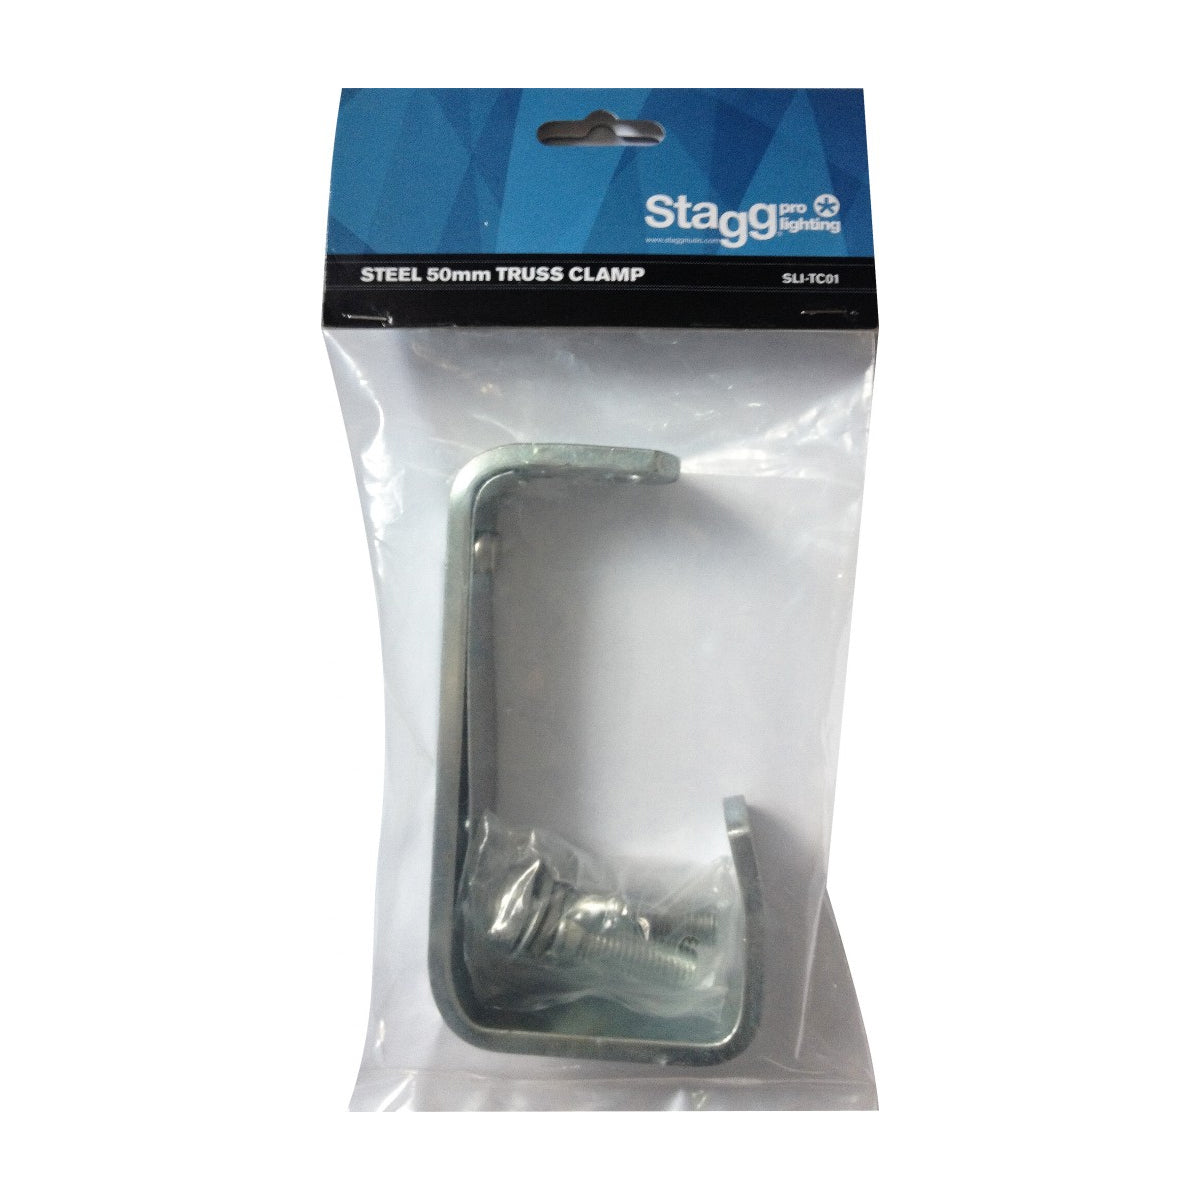 Stagg Truss 'G' Clamp